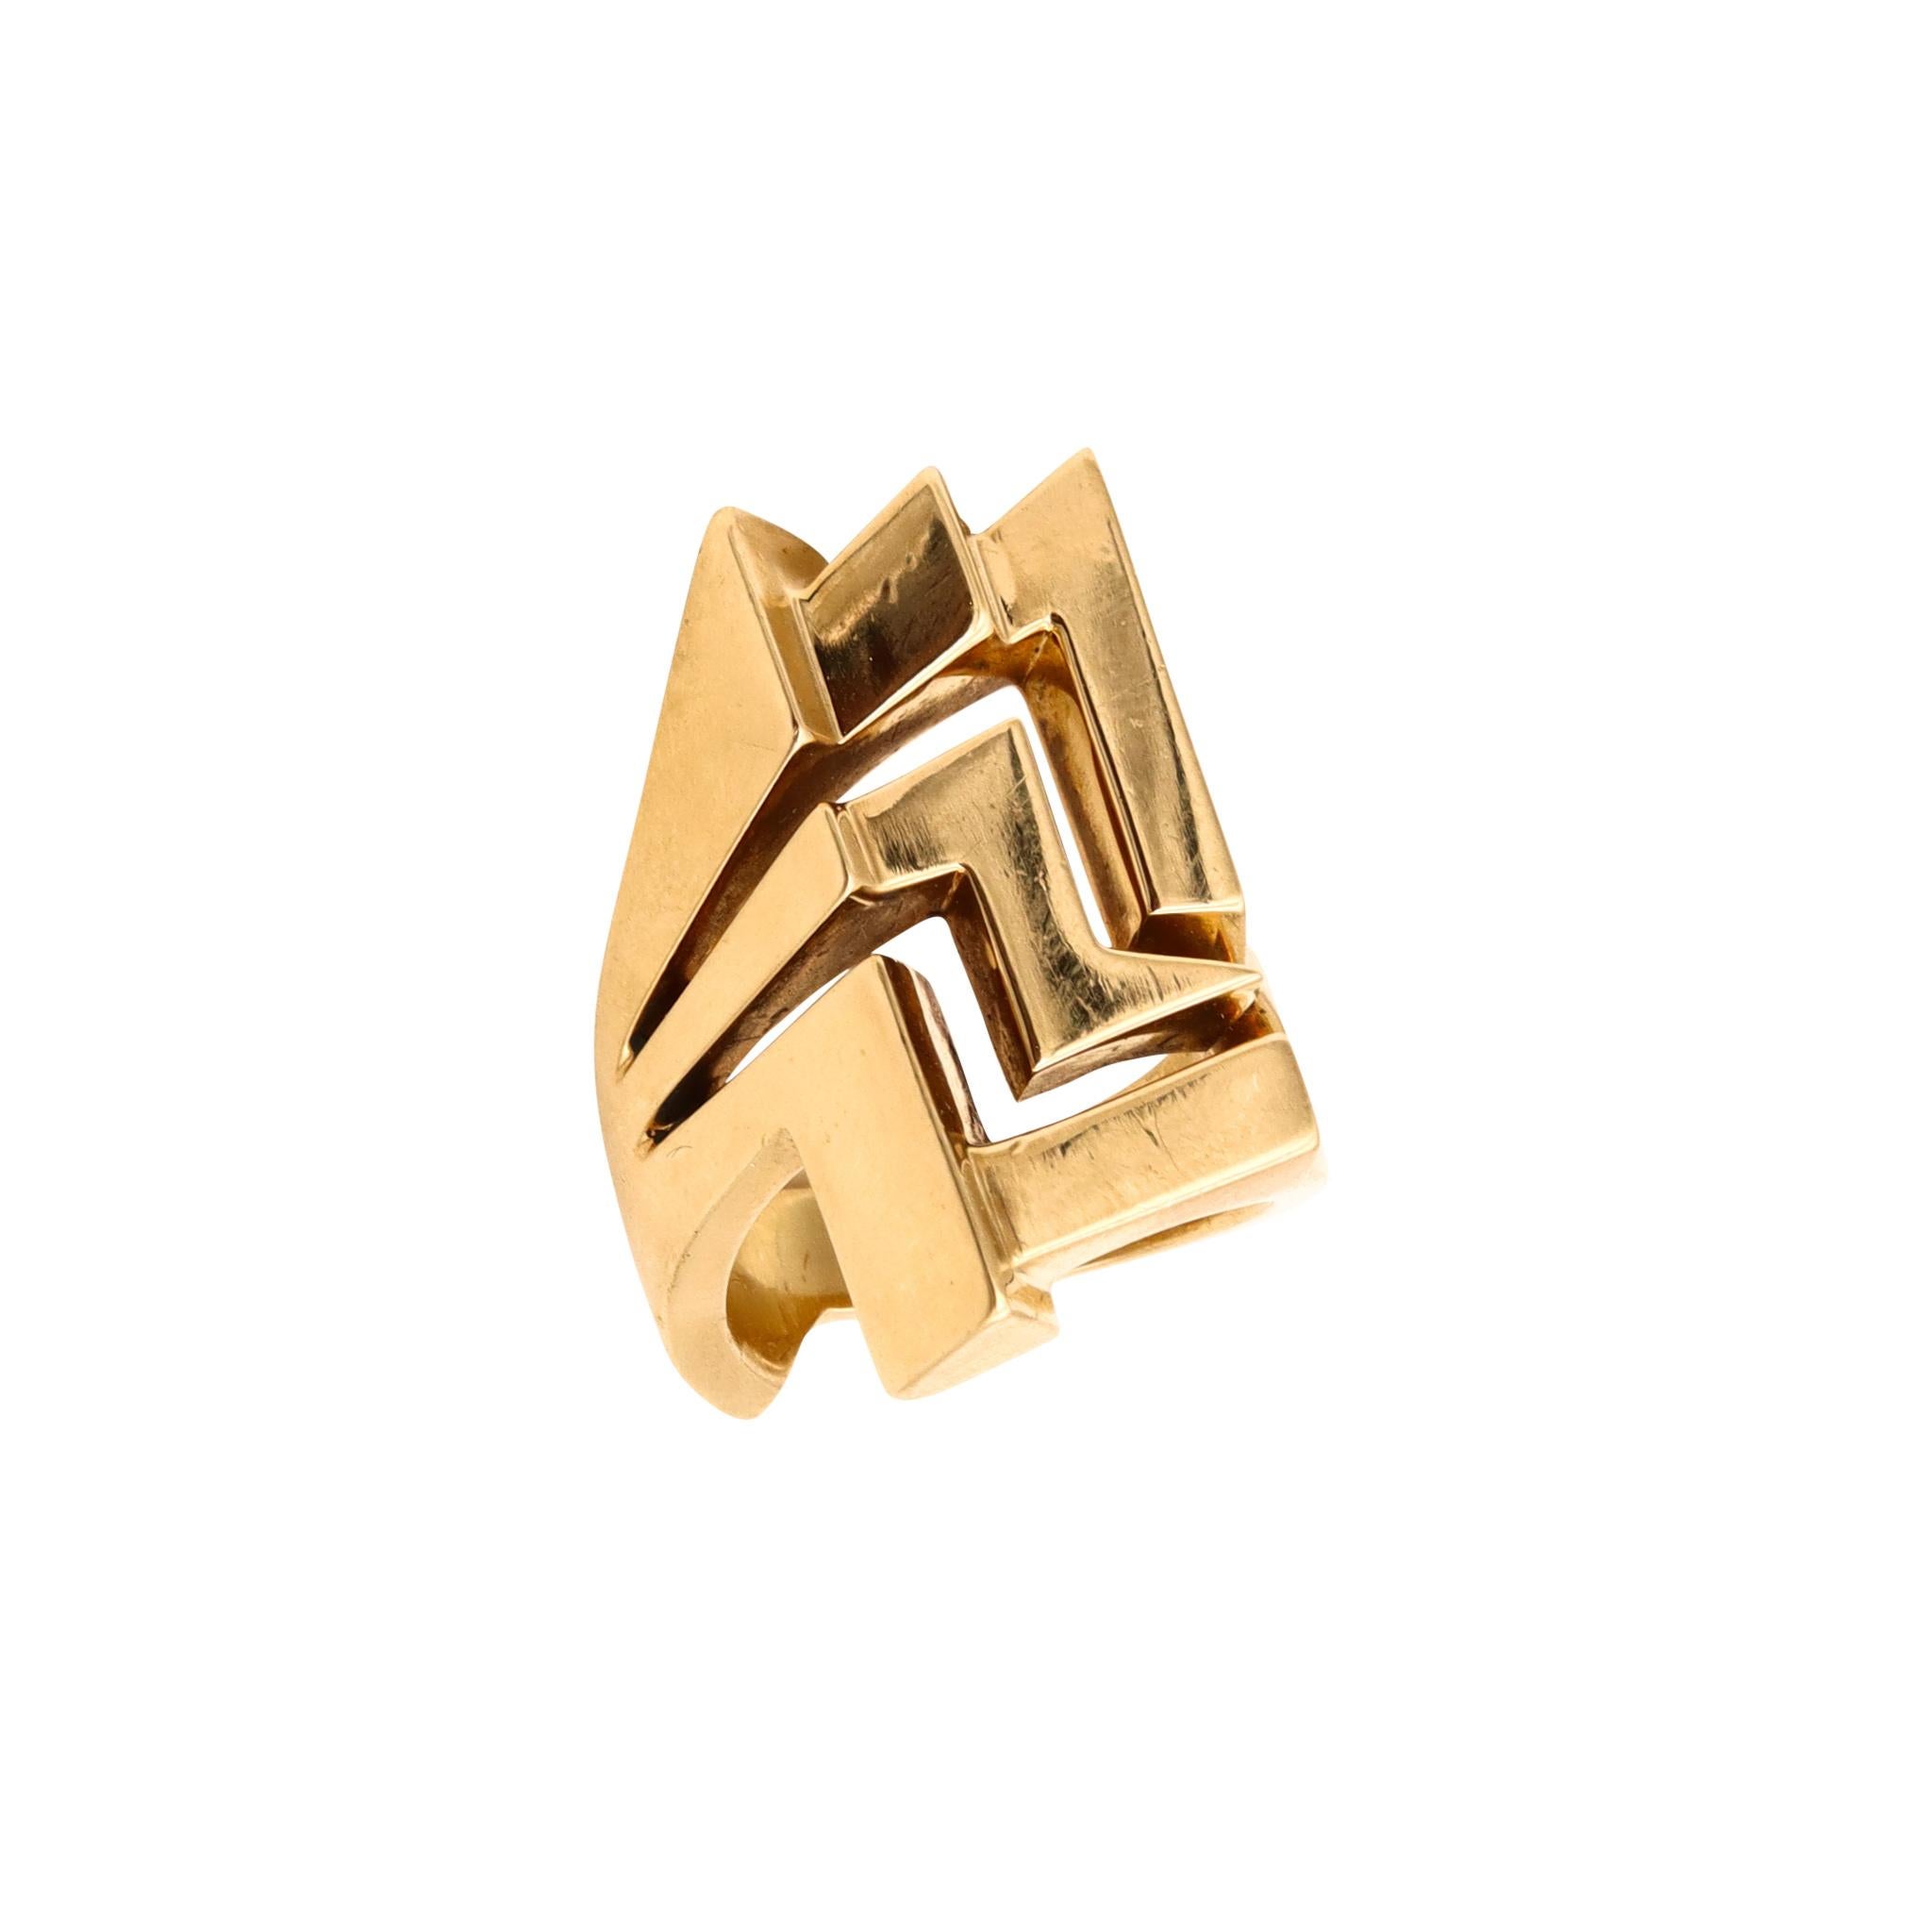 Sculptural ring designed by Alan Giovannetti.

Vintage sculptural piece created by Giovannetti at his studio in California, circa 1970's. This cocktail ring is an studio piece crafted in solid yellow gold of 18 karats, with high polished surfaces.